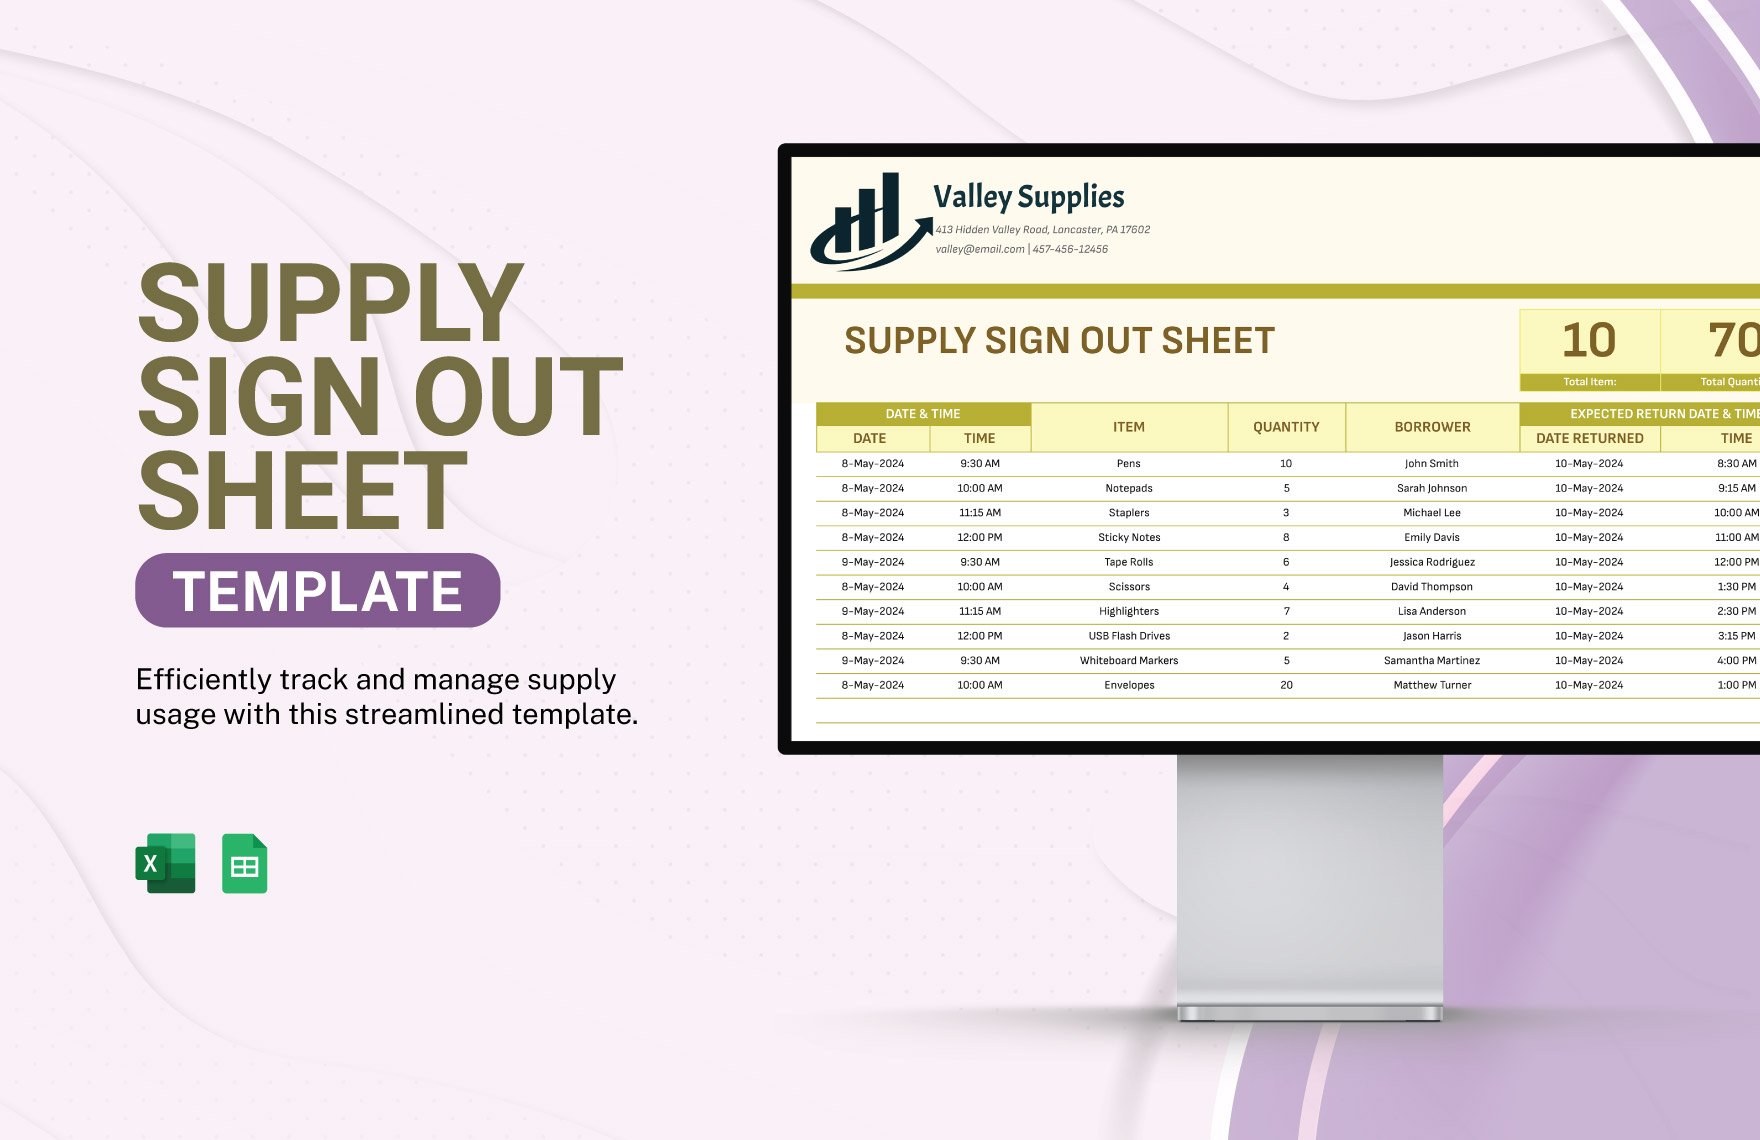 Supply Sign Out Sheet Template in Excel, Google Sheets